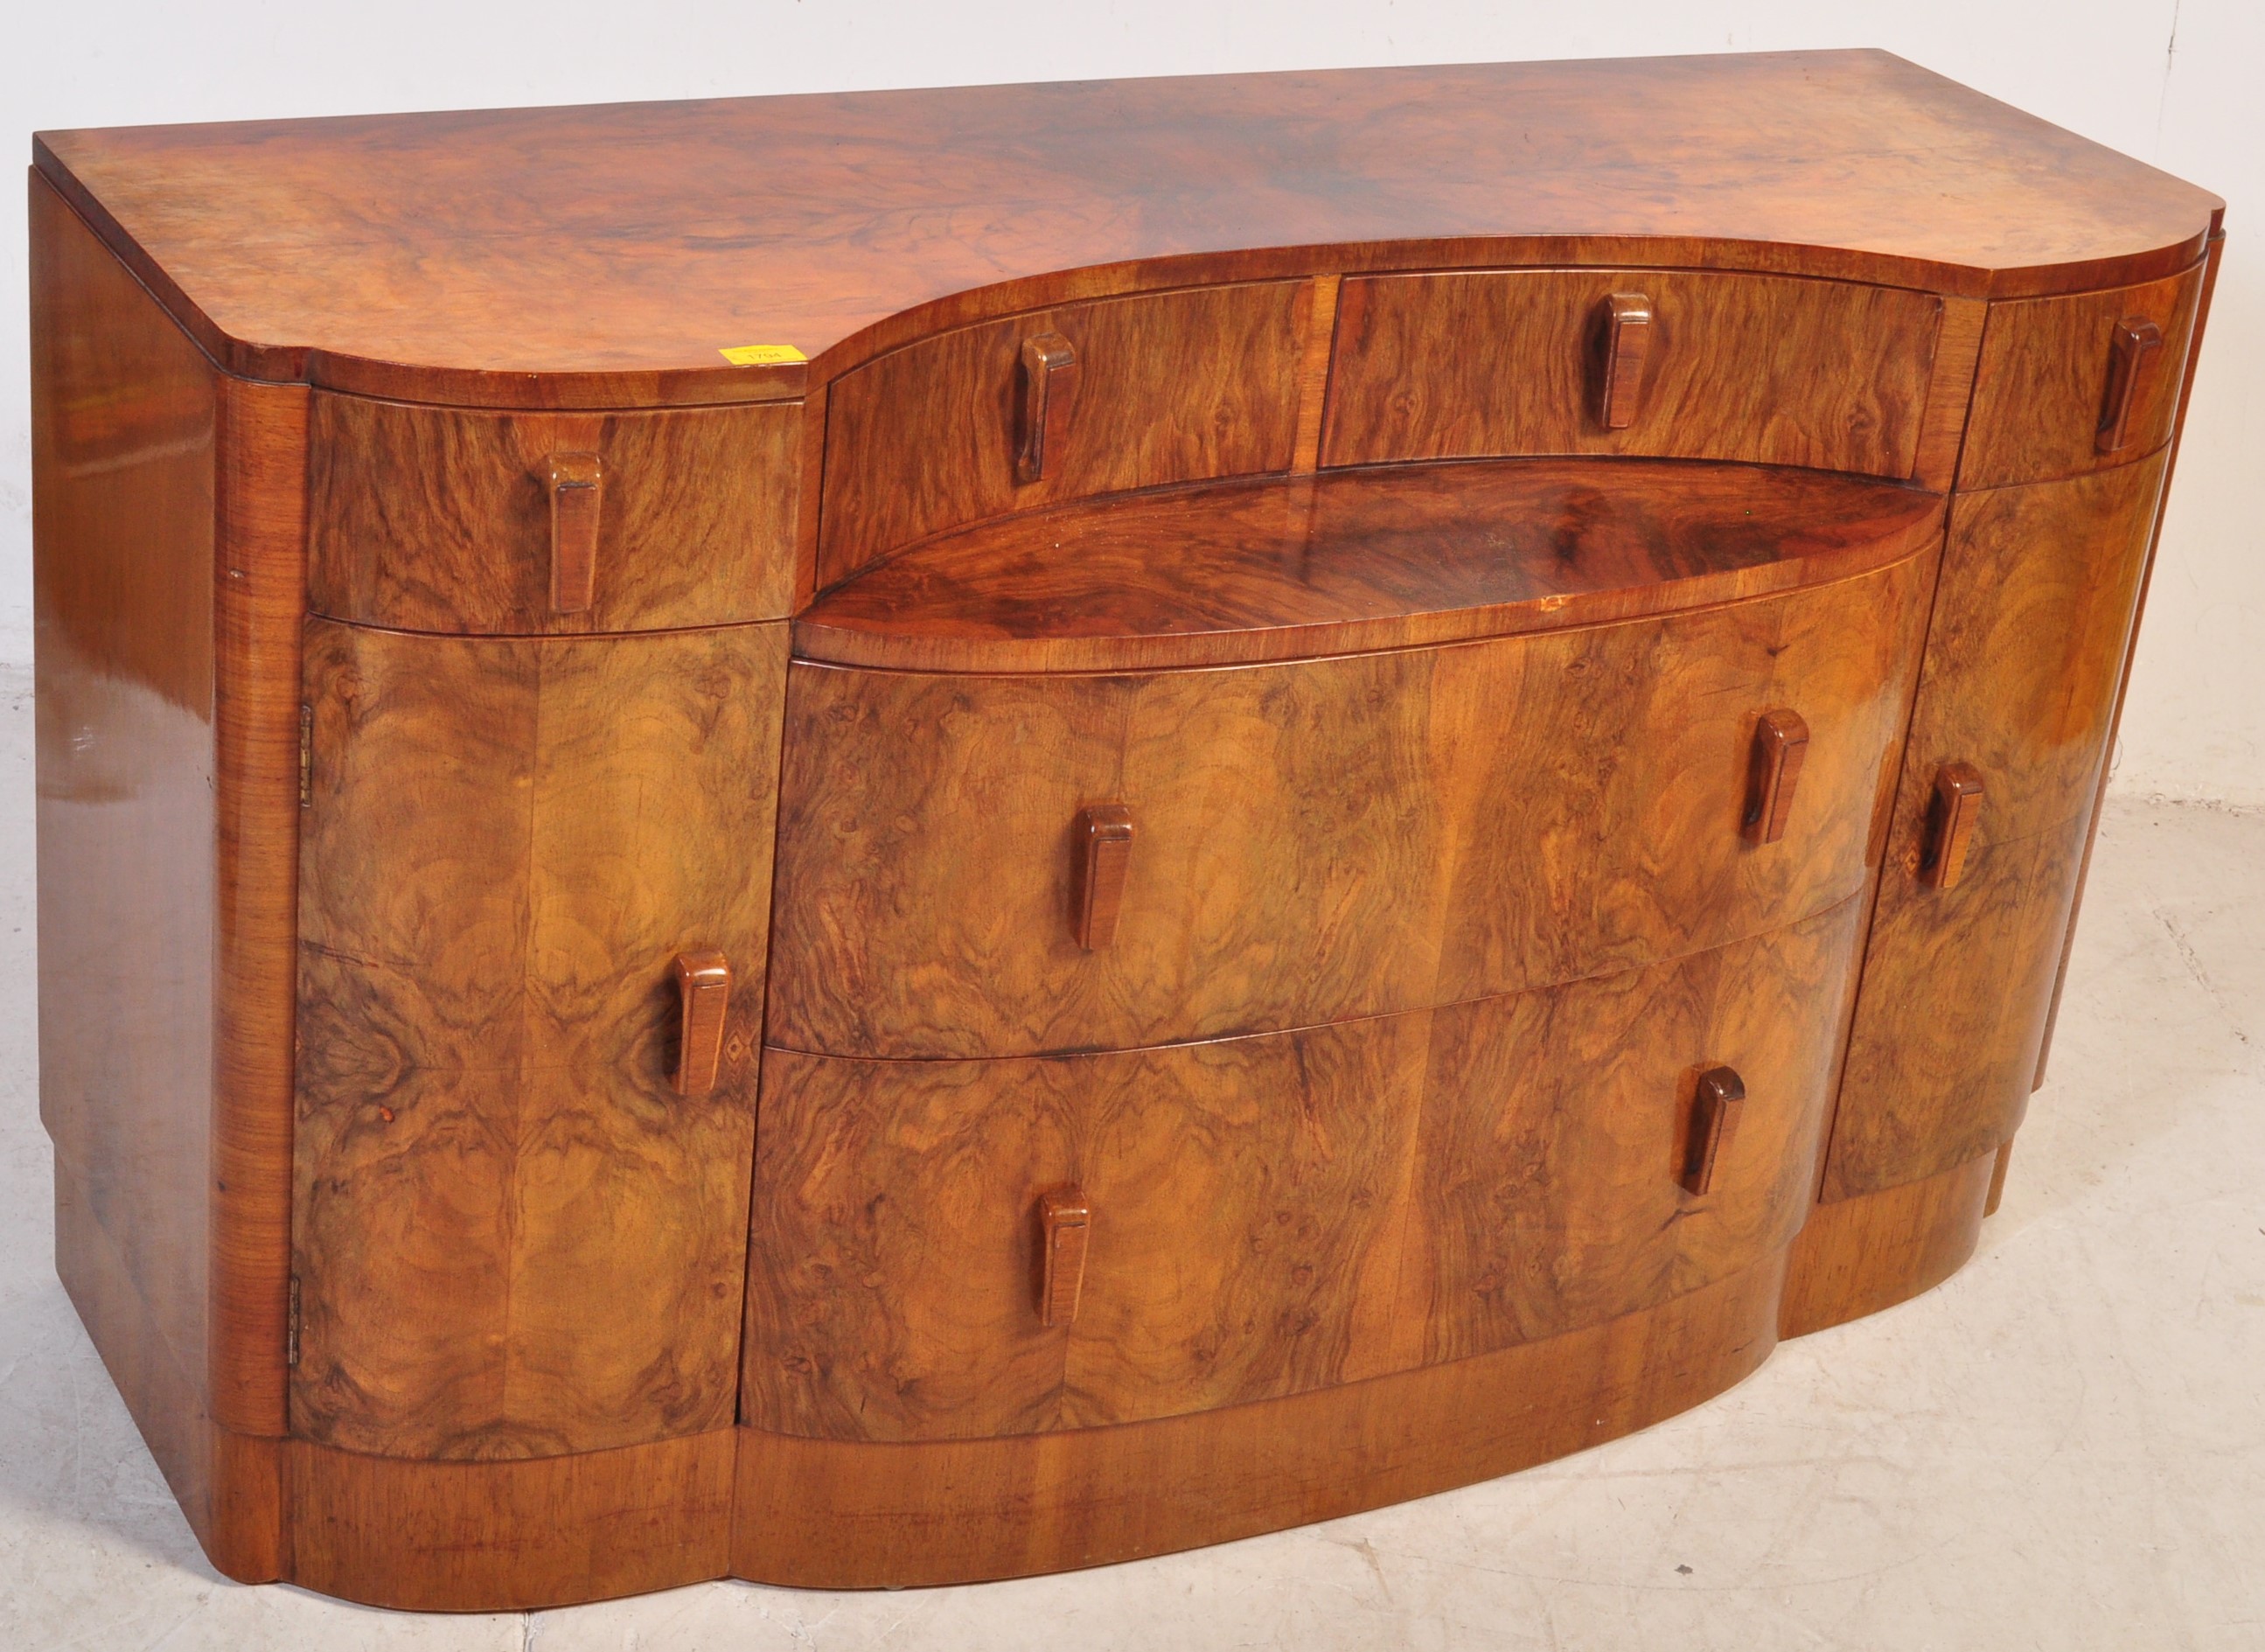 A 1930's ART DECO BURR WALNUT DRESSING TABLE CHEST - Image 2 of 9